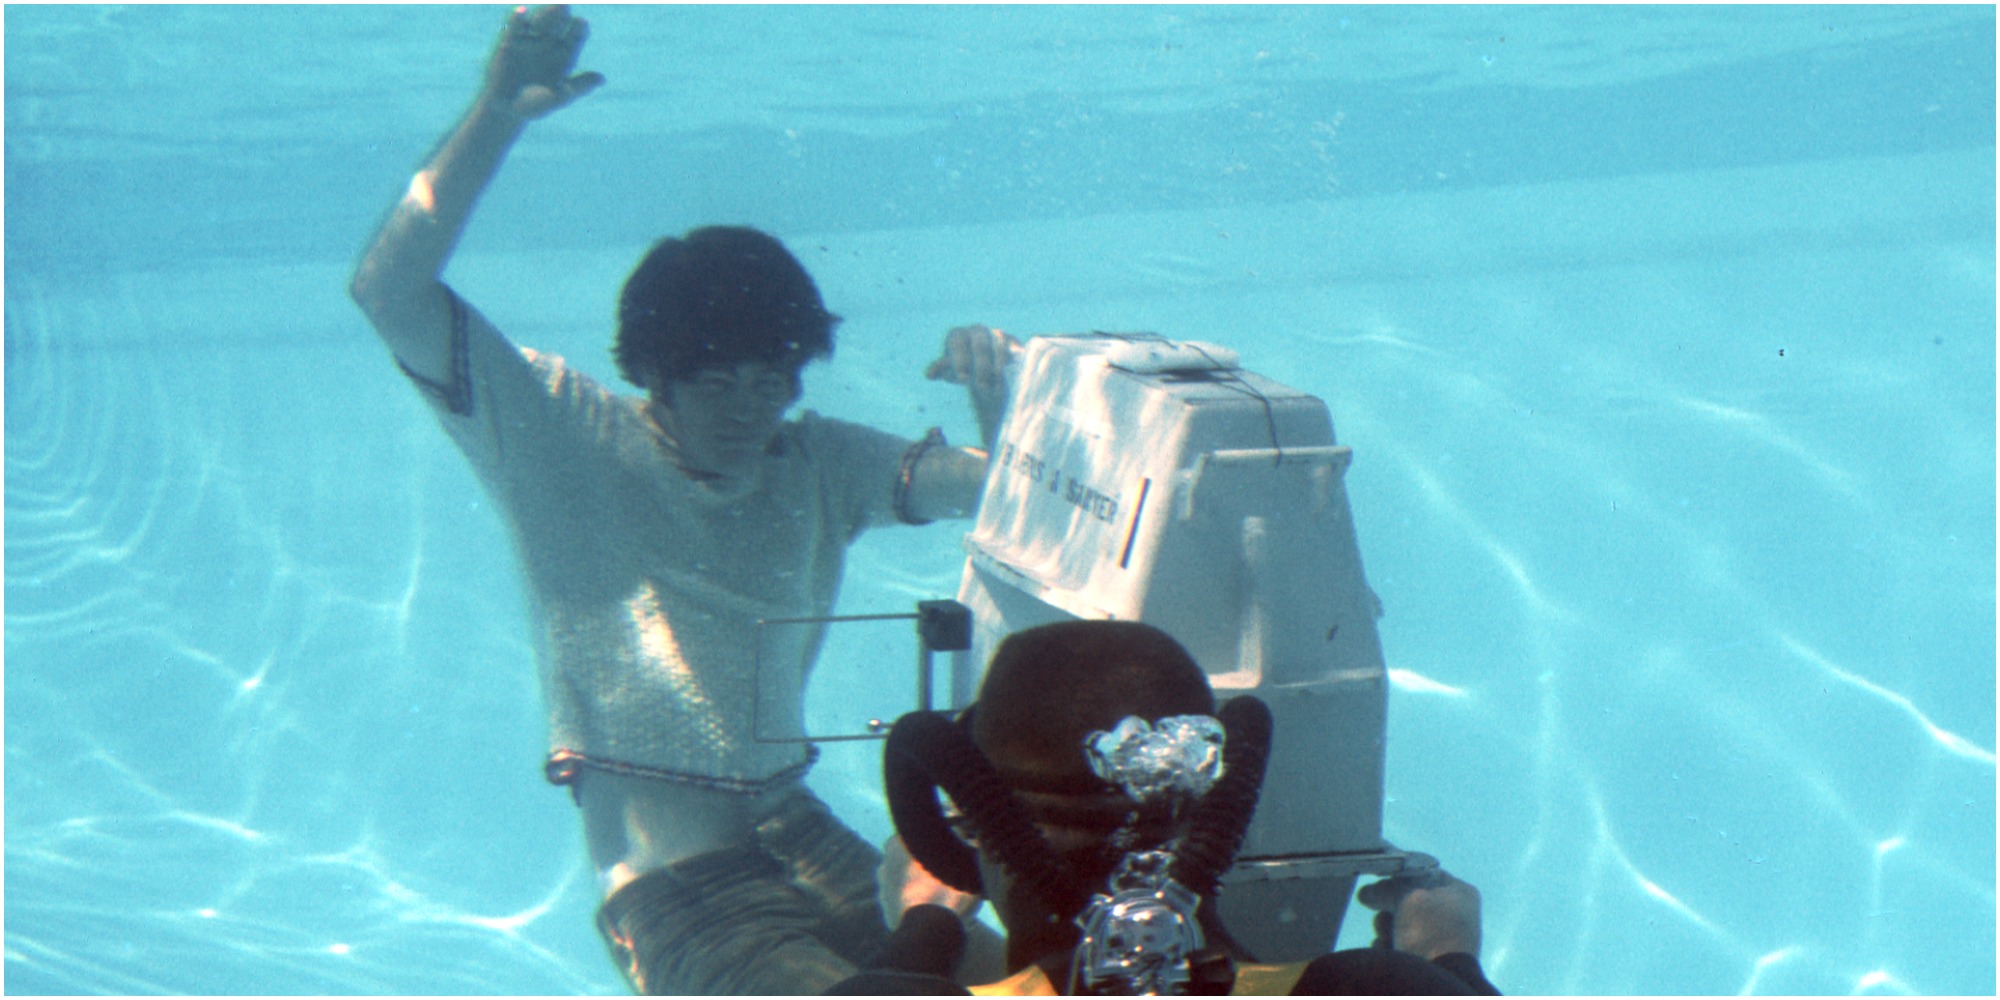 Micky Dolenz underwater shooting a scene from Head.